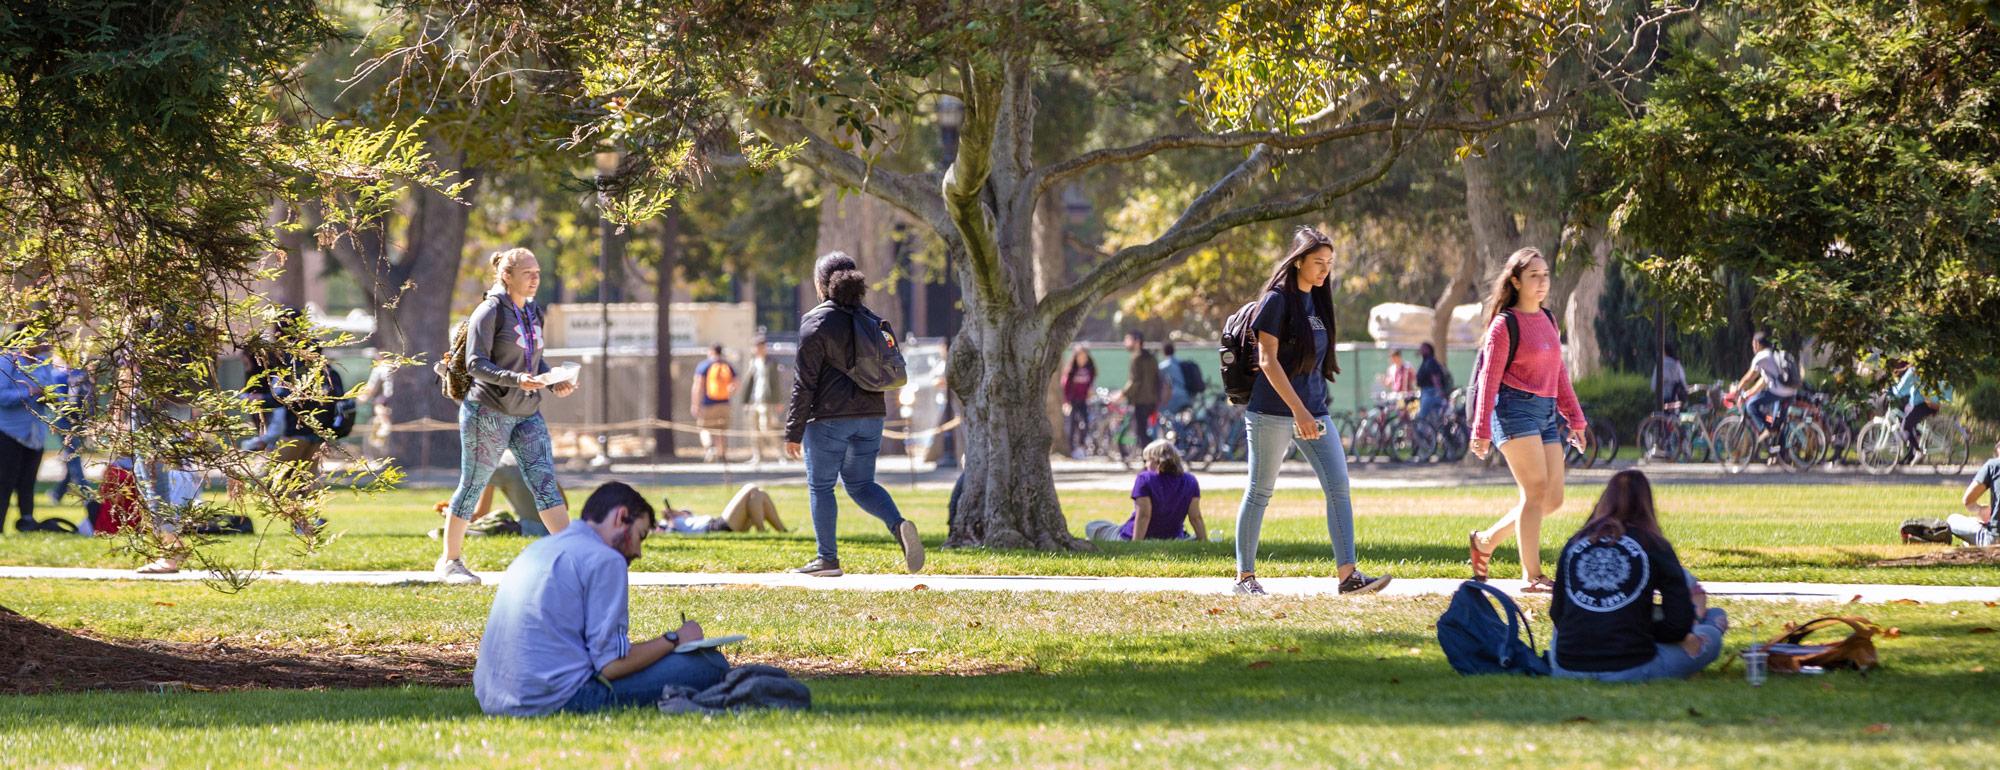 students sitting and walking, enjoying the quad on a sunny day